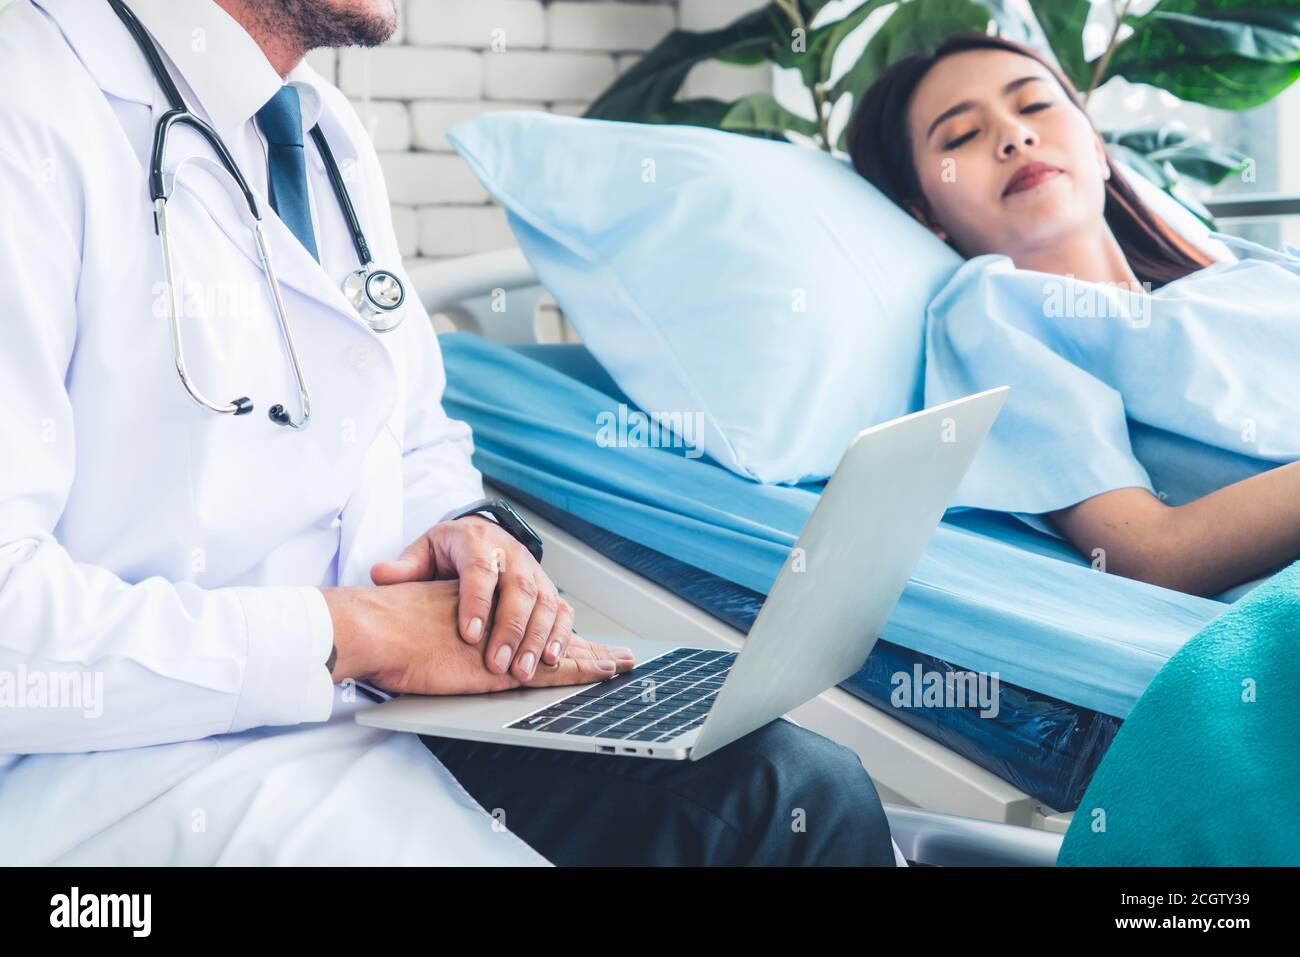 Doctor in professional uniform examining patient at hospital or medical clinic. Health care , medical and doctor staff service concept. Stock Photo